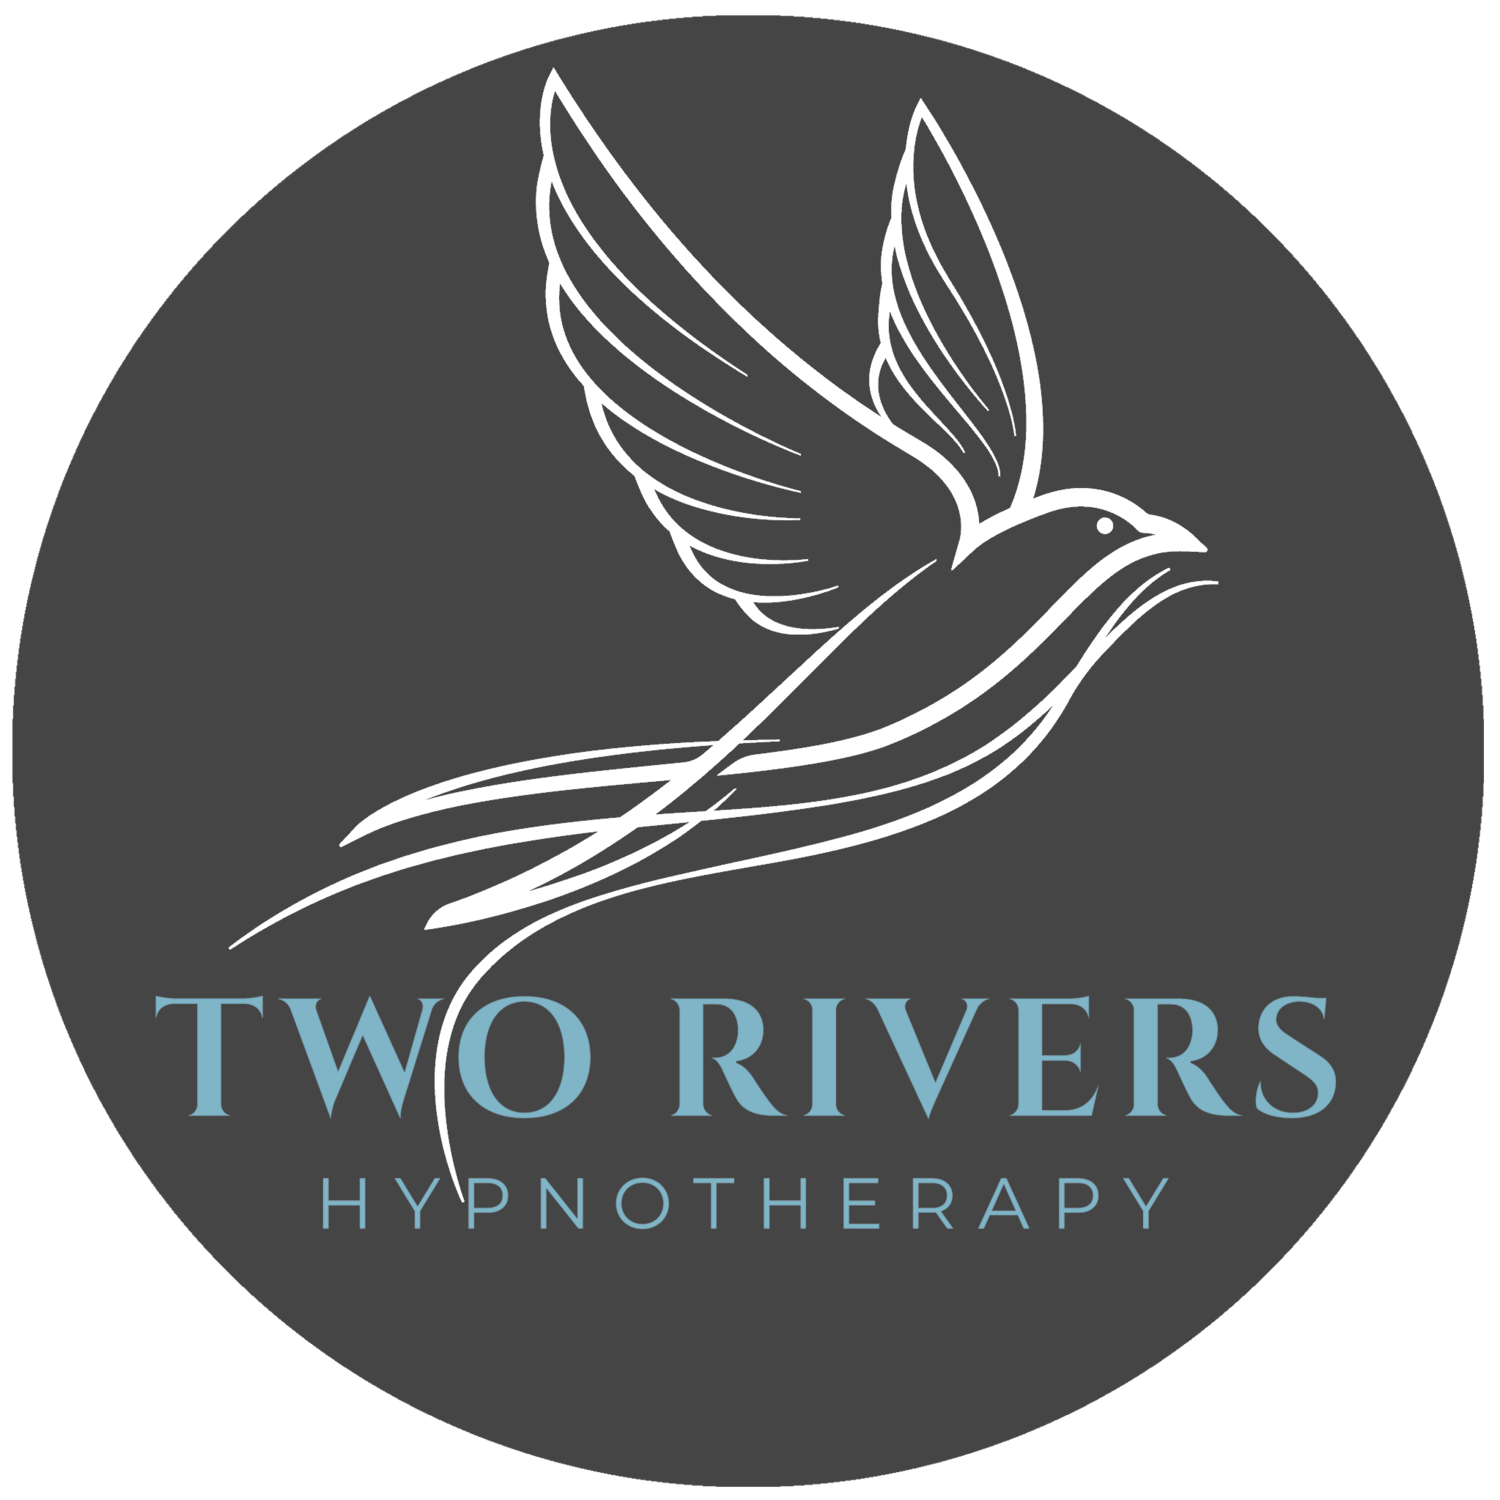 Two Rivers Hypnotherapy